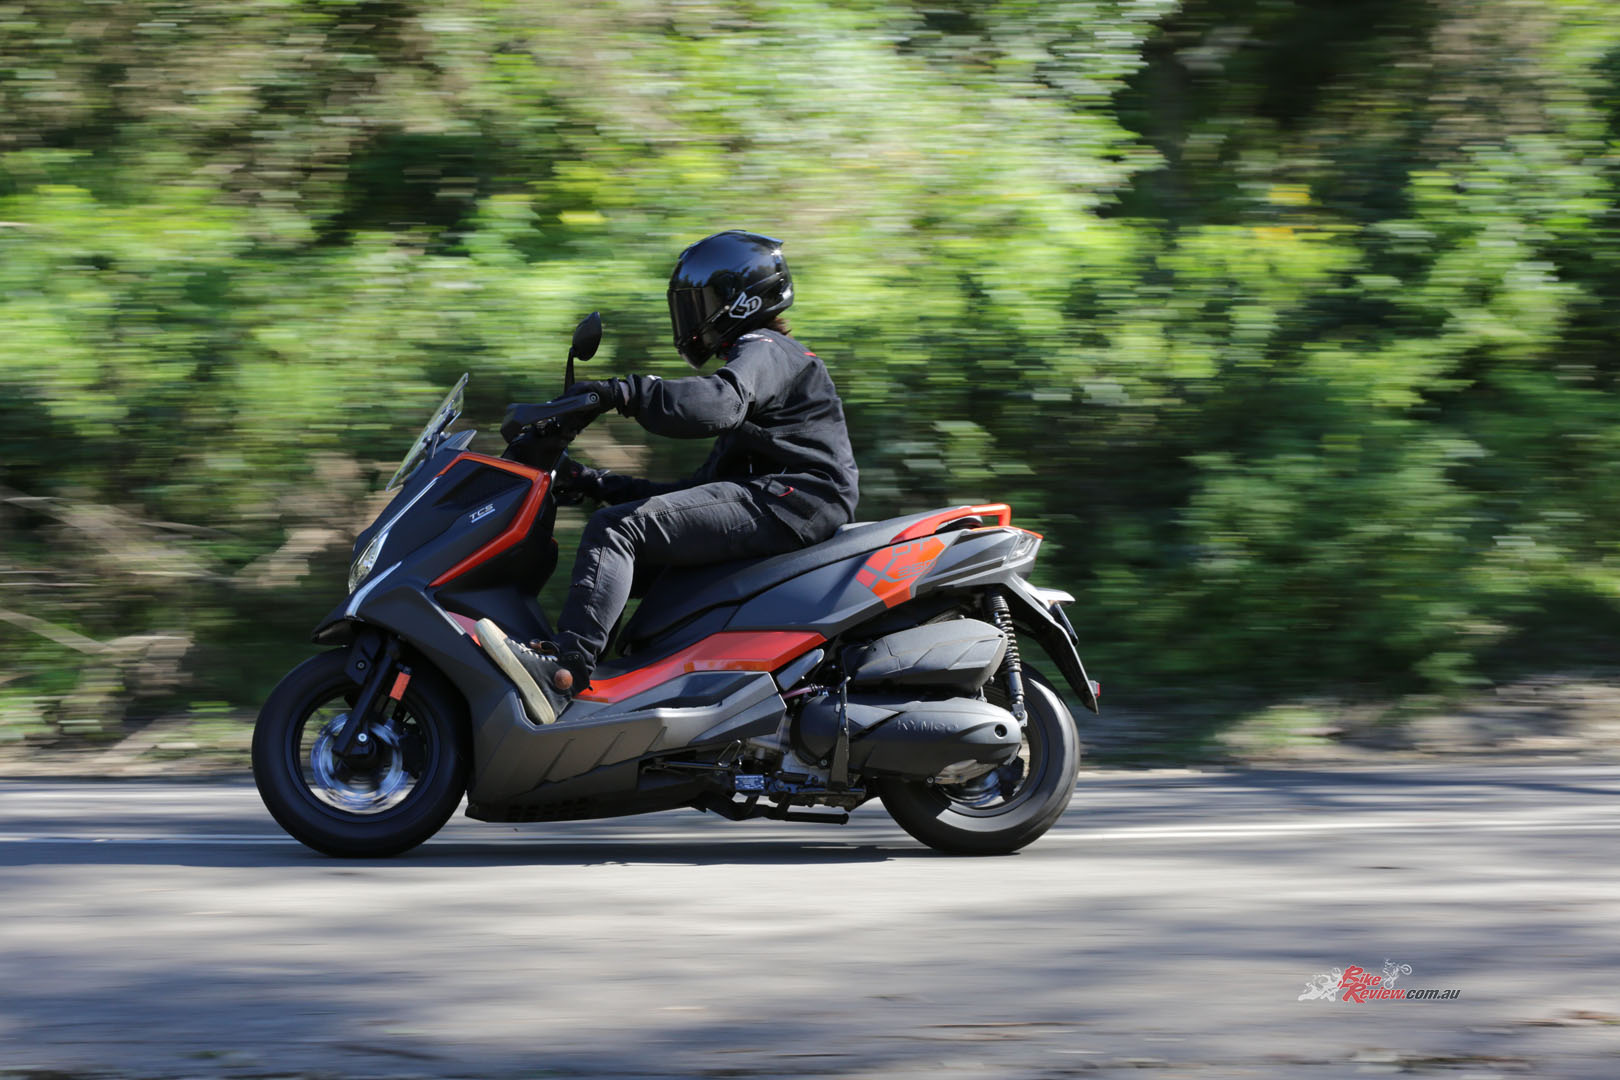 The adventure tyres were more than compliant when it came to cornering, with KYMCO mindful of the fact that their customers aren't going to spend all their time off-roading...